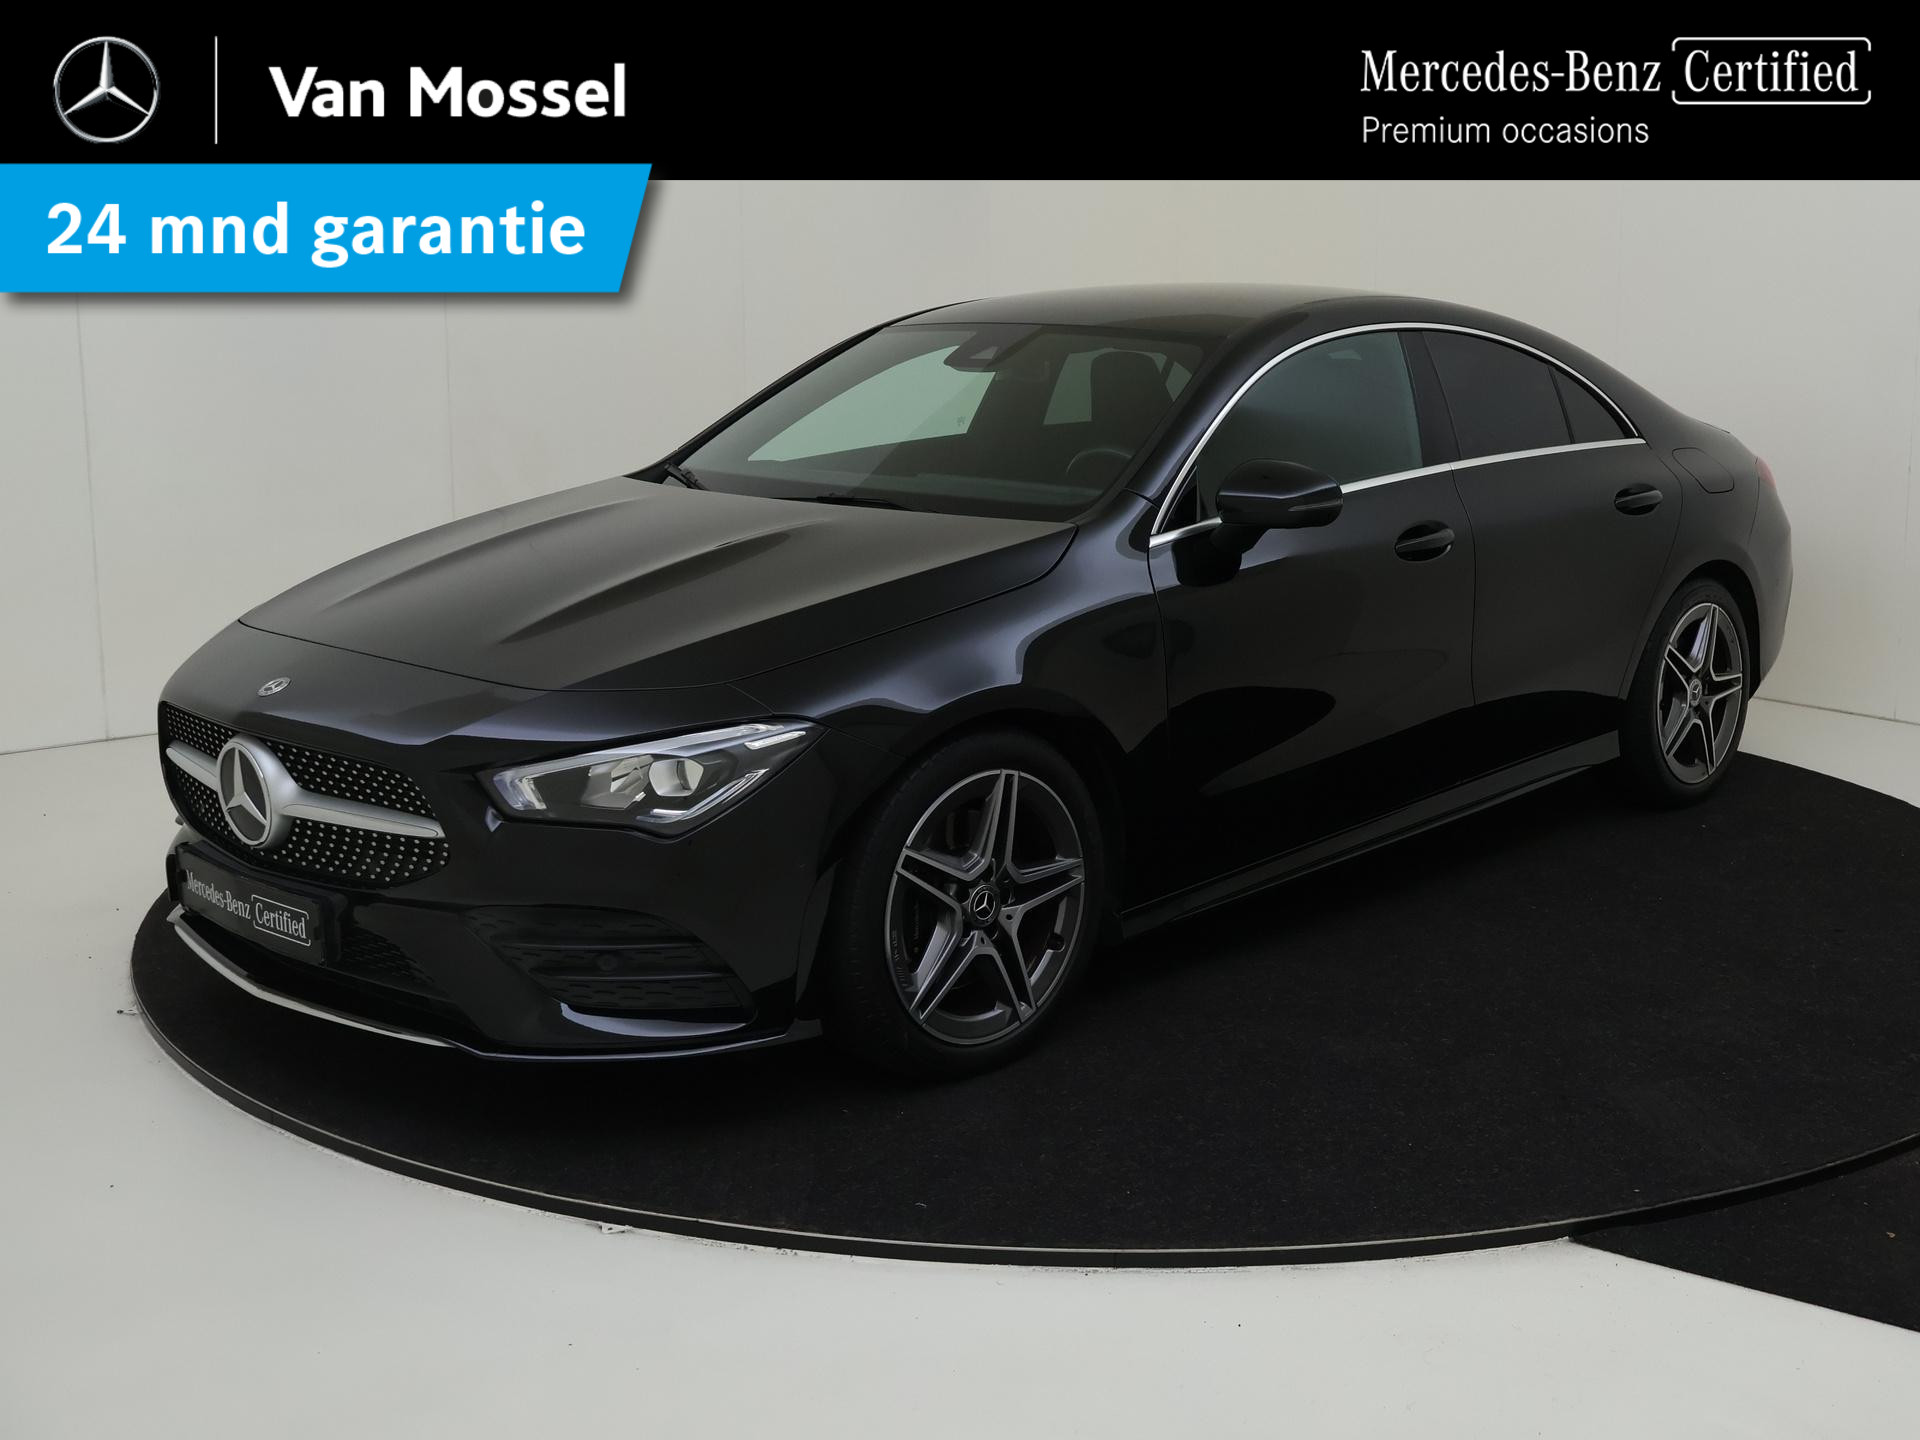 Mercedes-Benz CLA 200 Business Solution AMG /18 Inch /Stoelverwarming /Privacy glass / 24.160 KM!